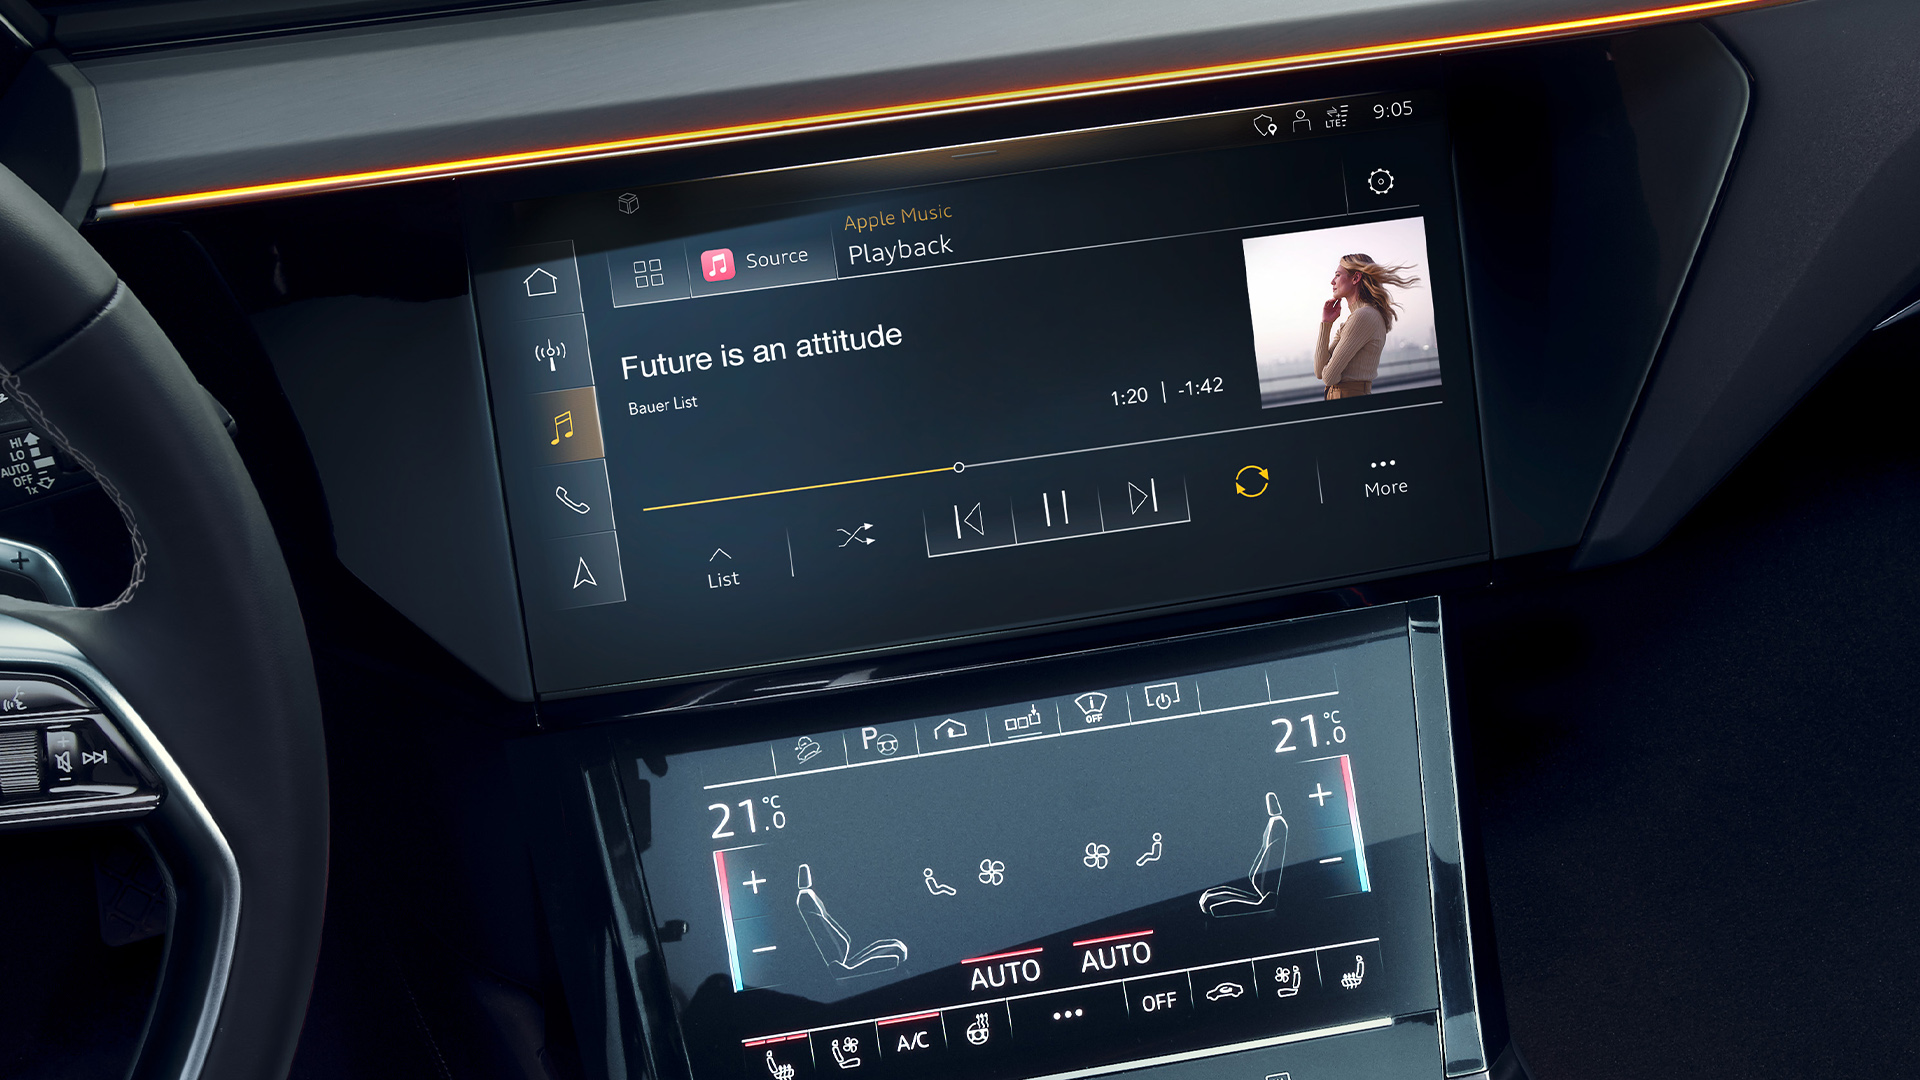 Close up of the display in the vehicle playing music.